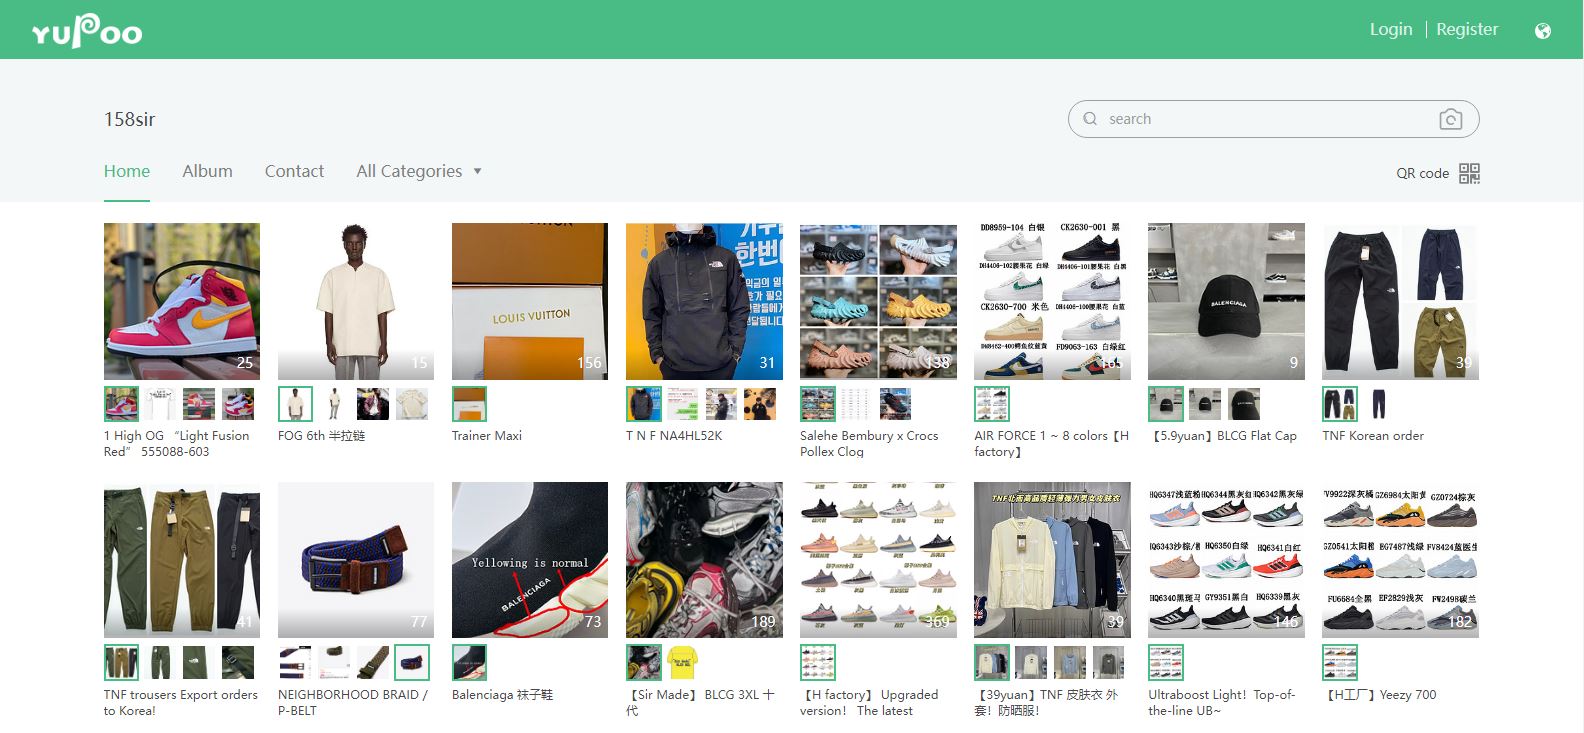 Screenshot of 158Sir Yupoo website showcasing multiple rows of replica clothes and sneakers